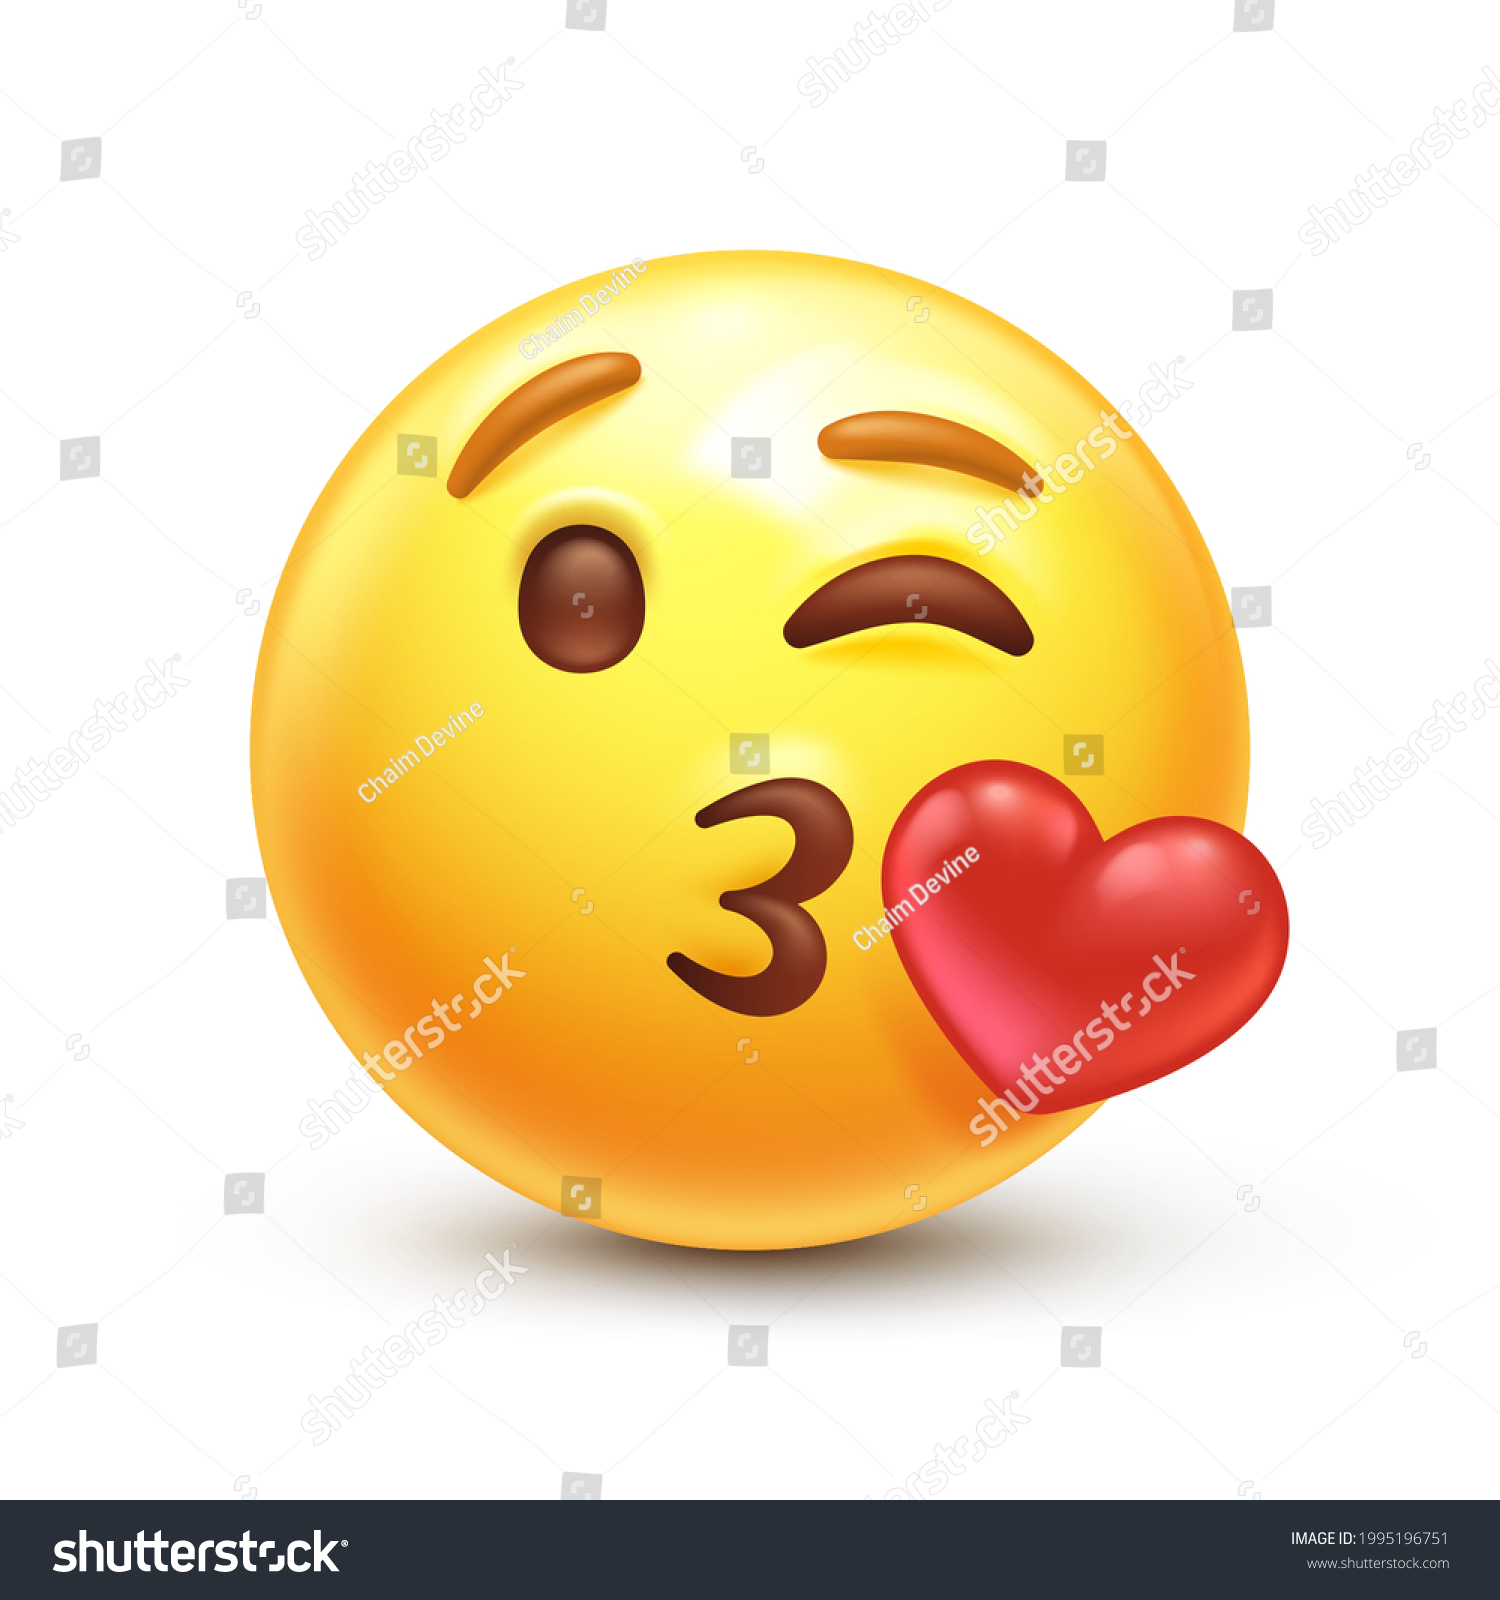 SVG of Kiss emoji. Love emoticon with lips blowing a kiss, winking yellow face with red heart 3D stylized vector icon svg